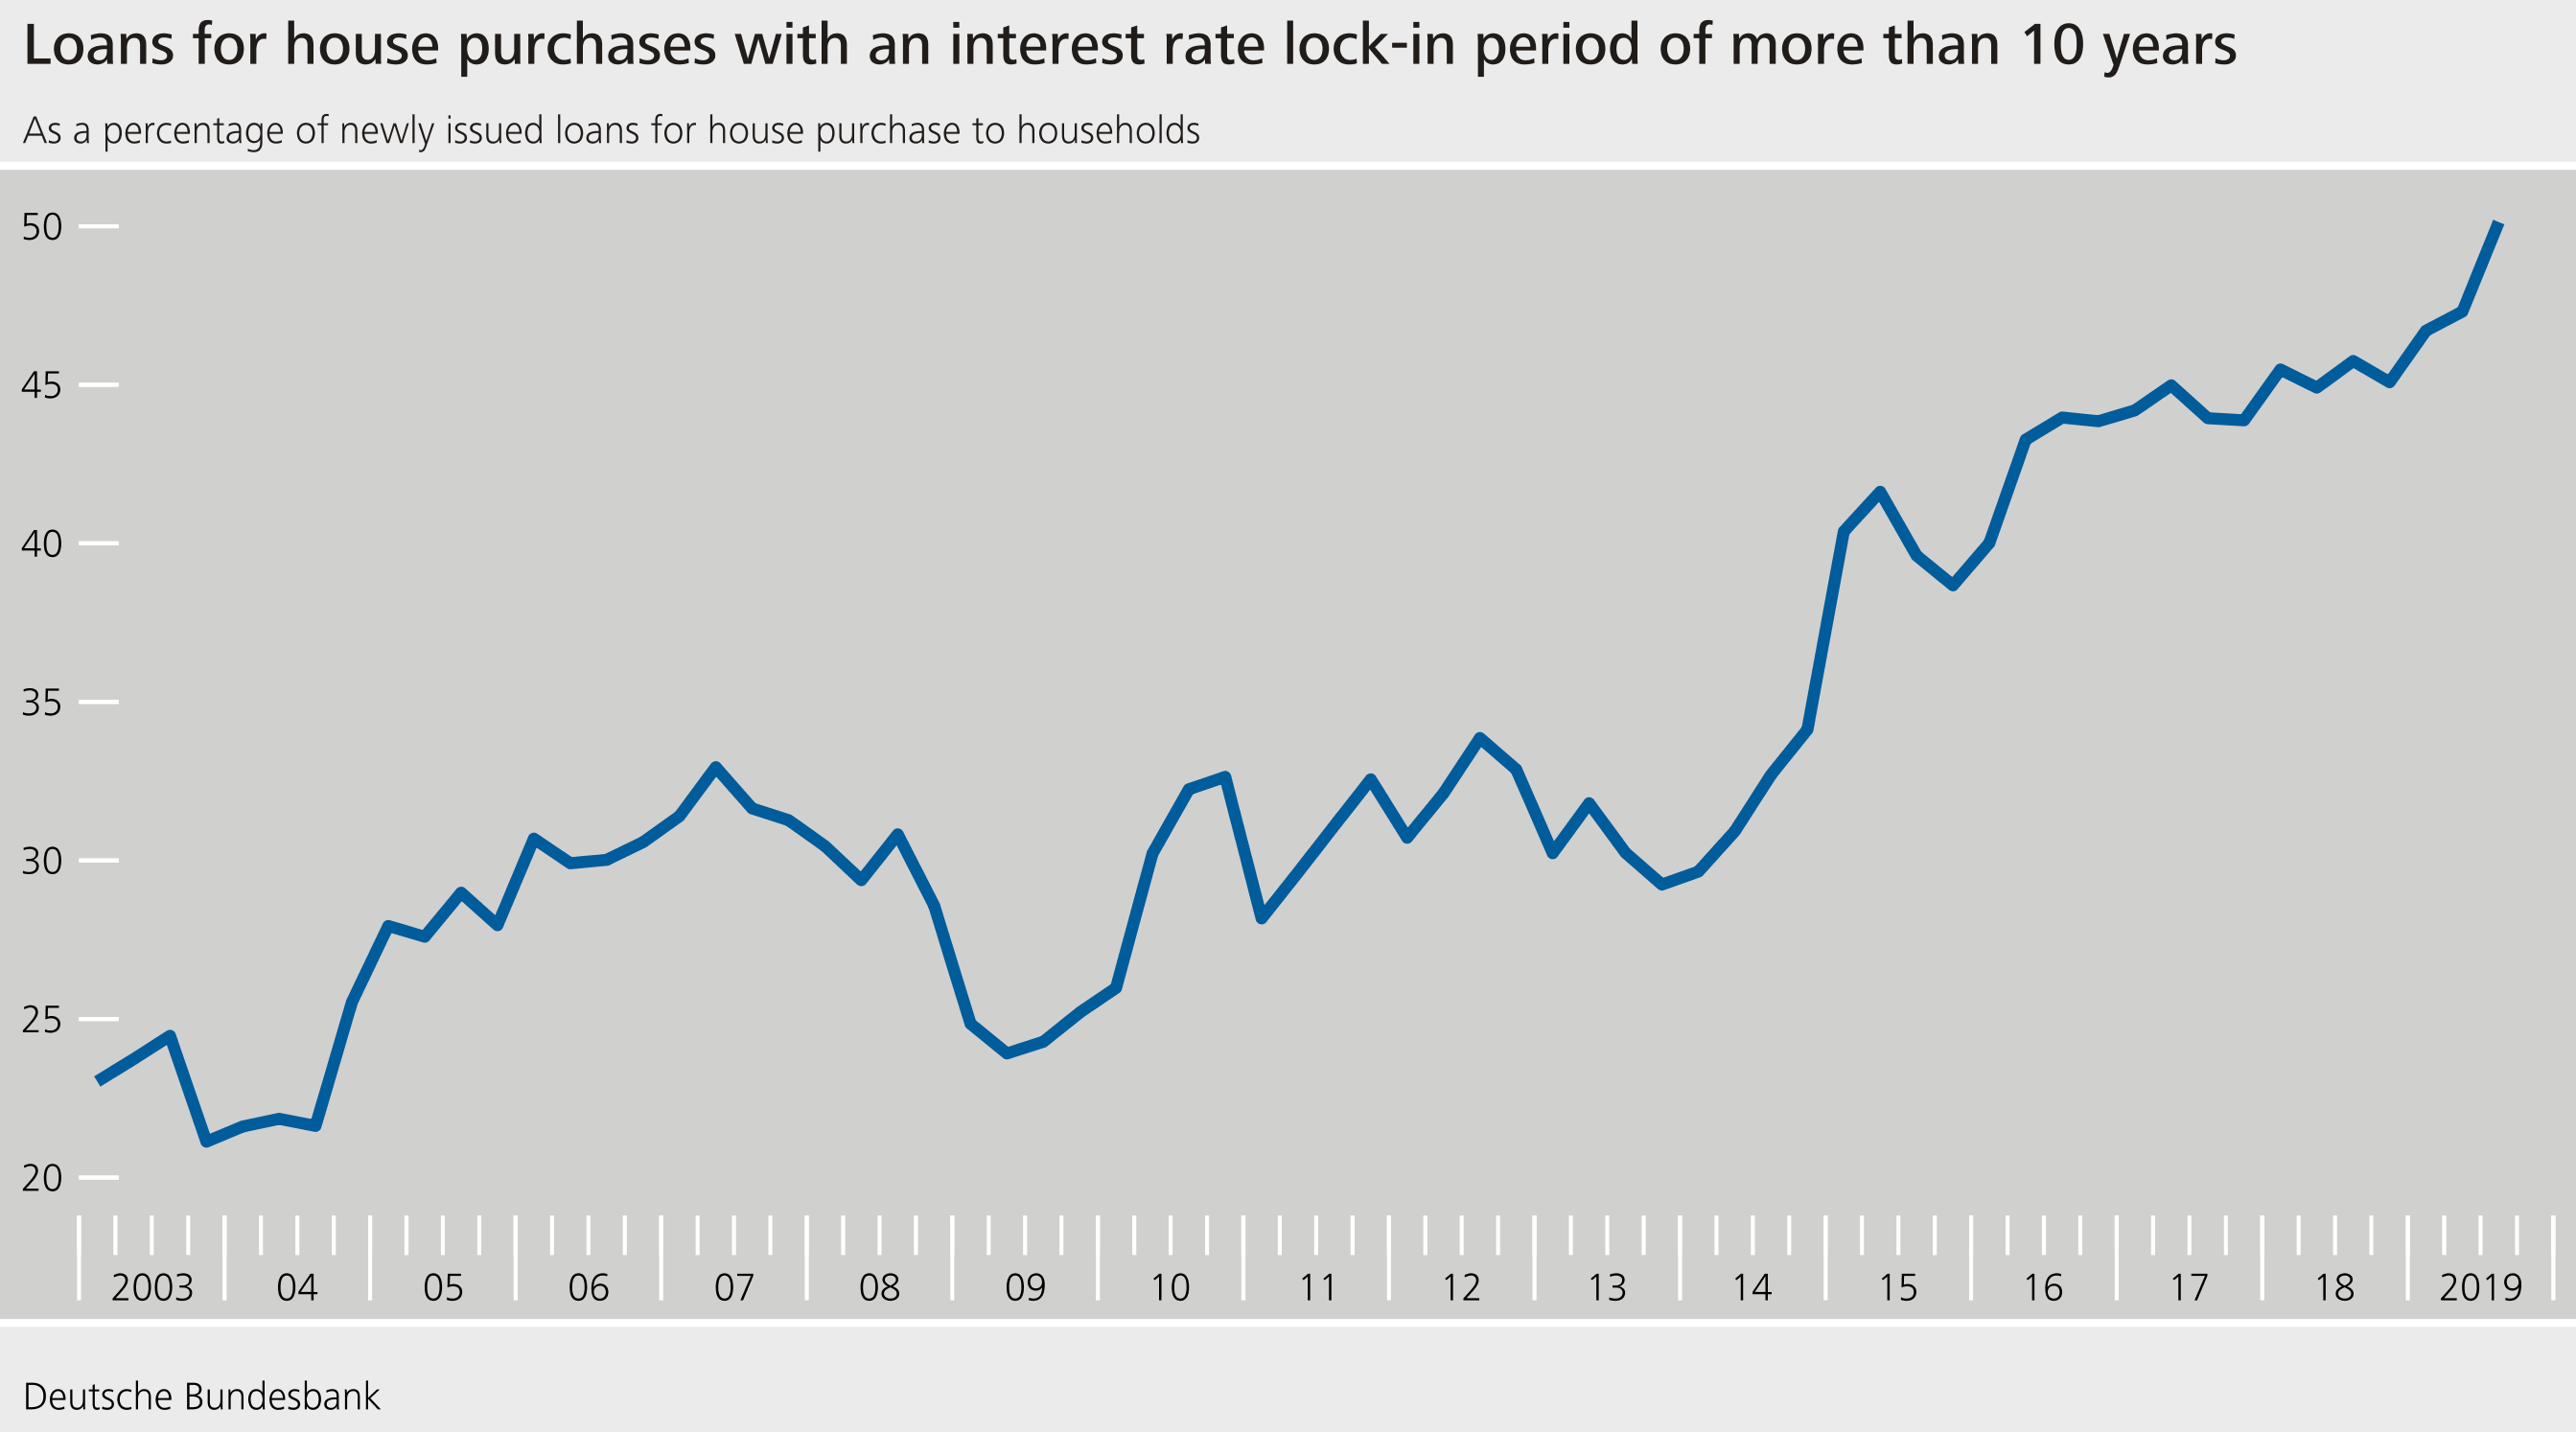 Loans of house purchases with an interest rate lock-in period of more than 10 years